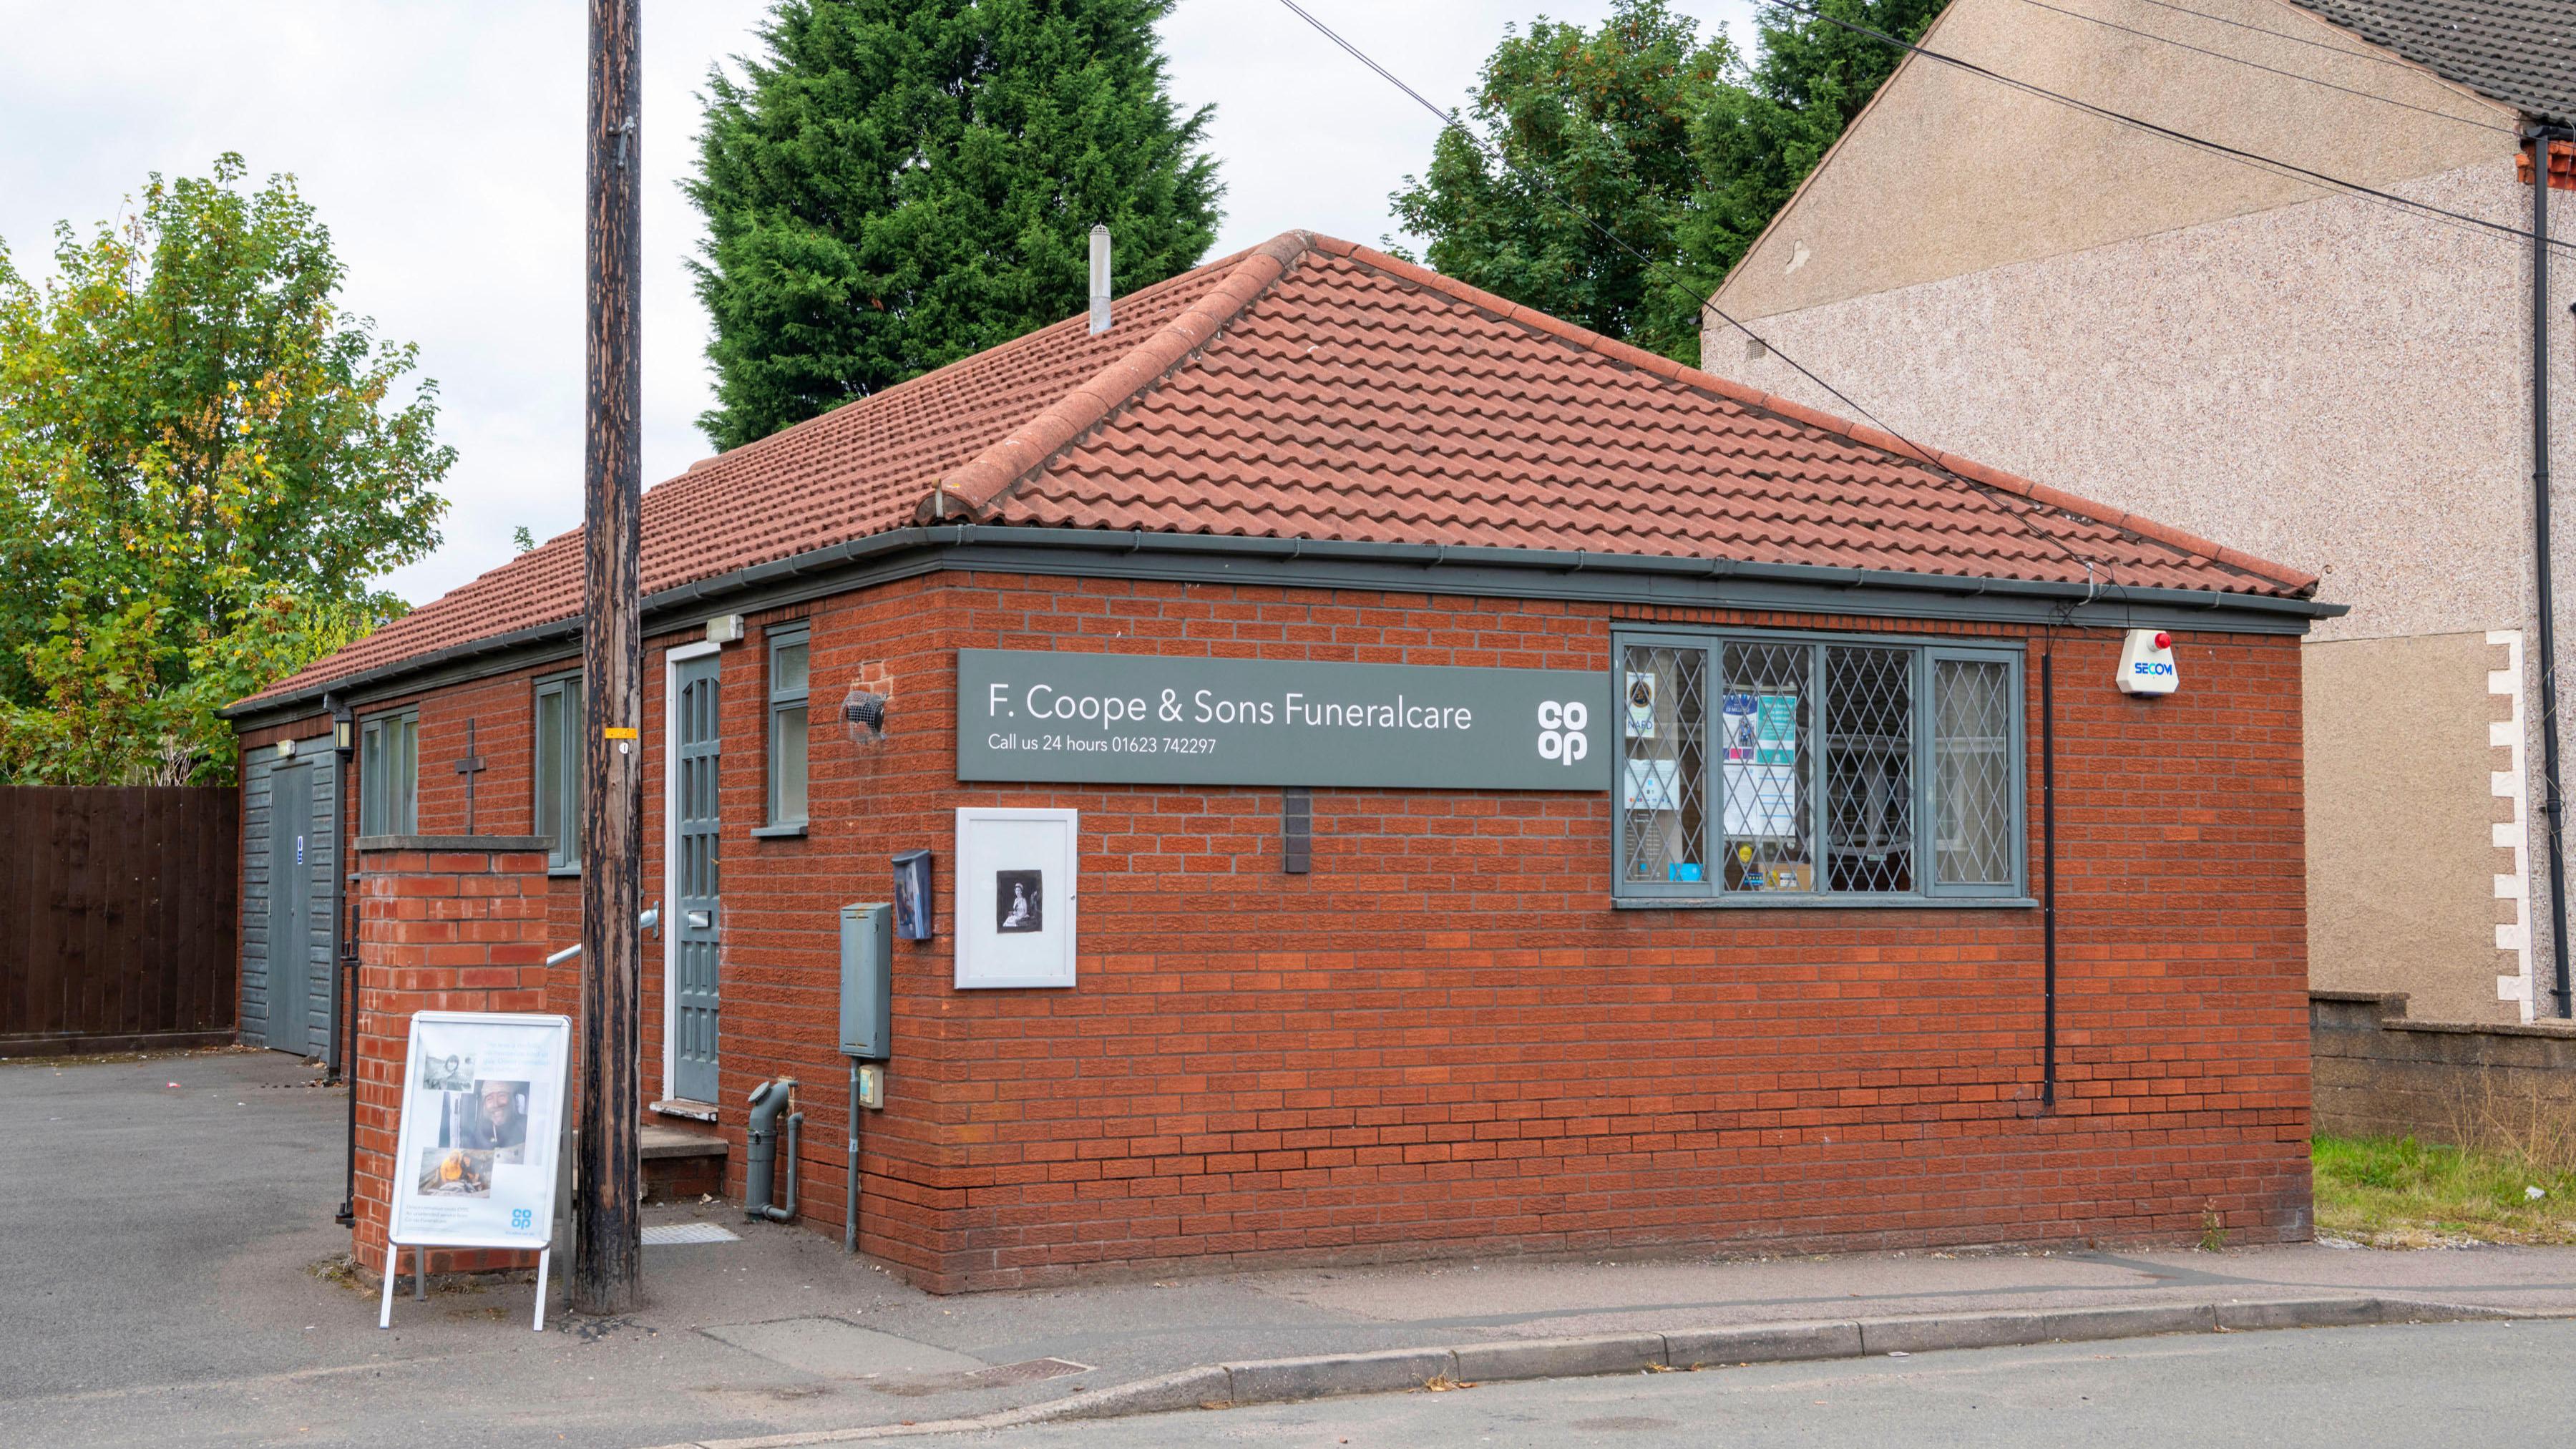 Images F. Coope & Sons Funeralcare